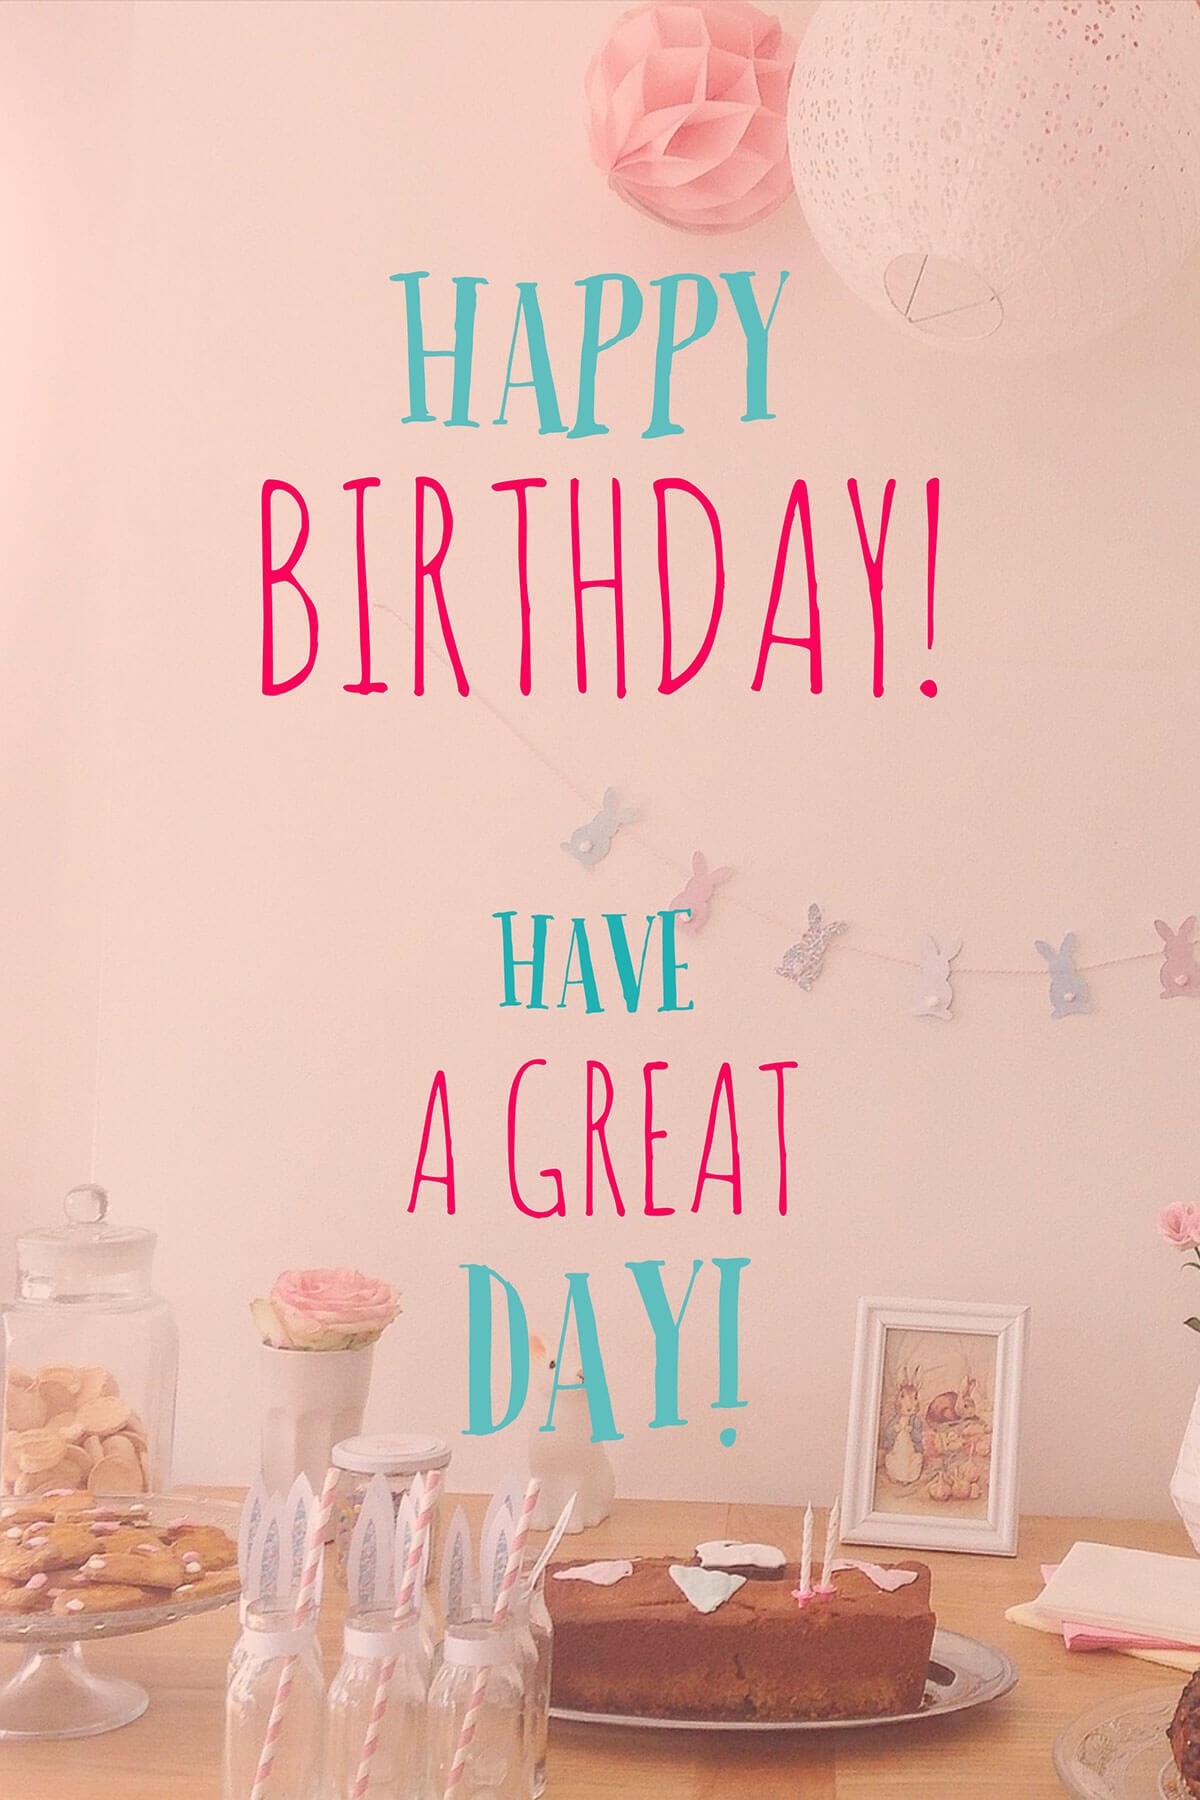 These 16 Printable Birthday Cards Cost Absolutely Nothing! | Diy